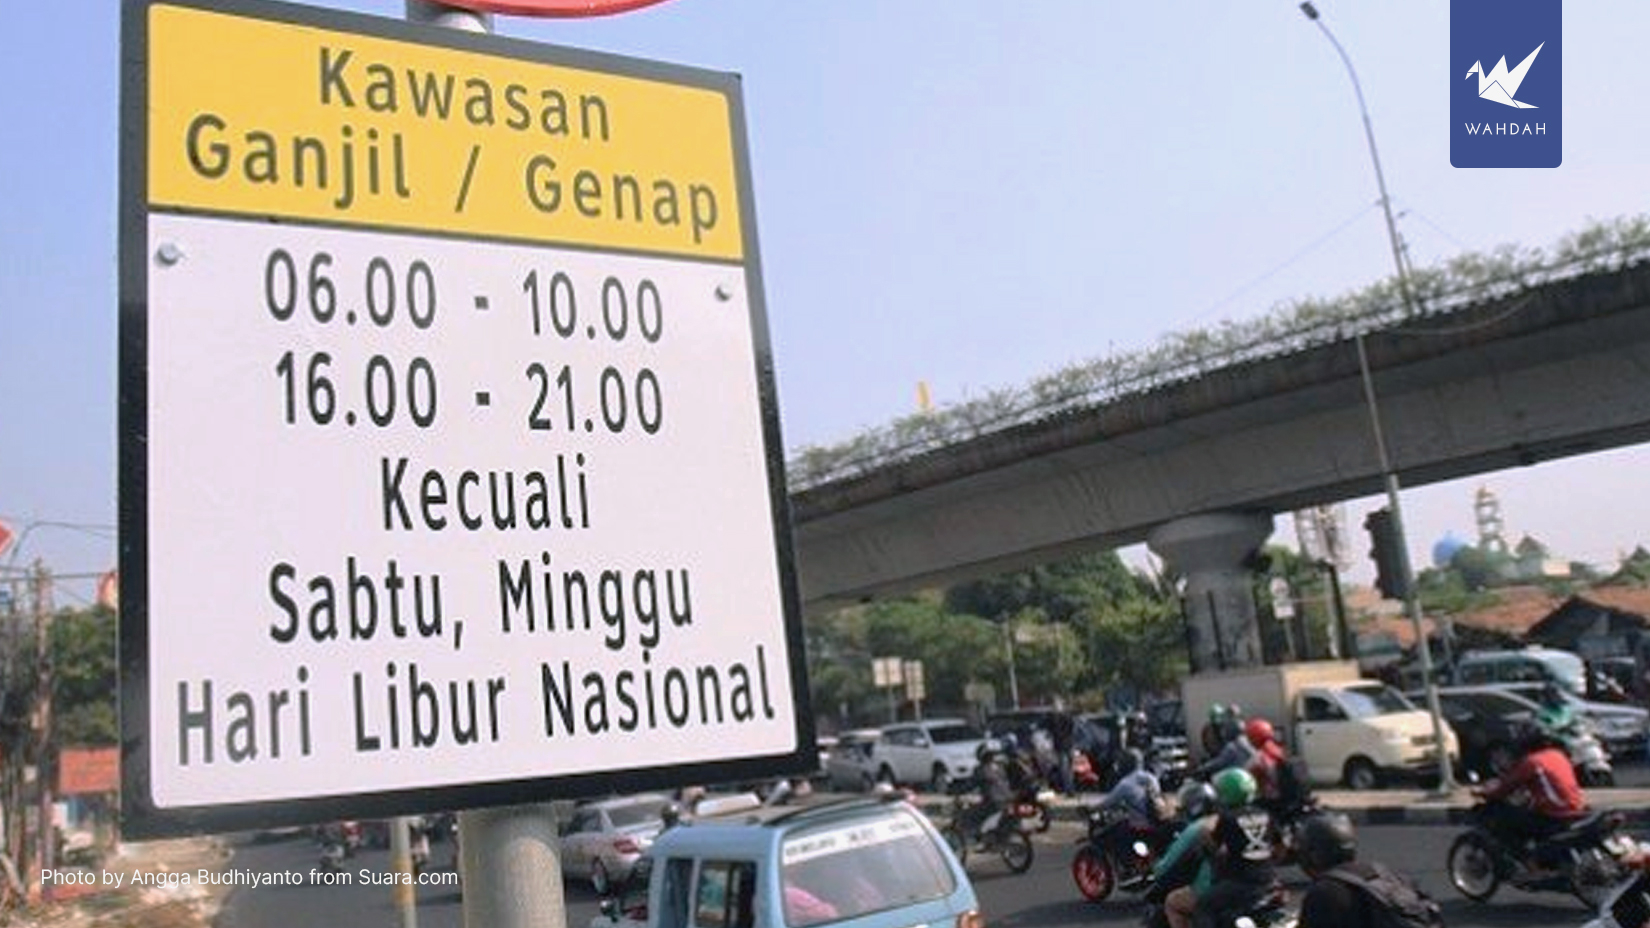 How to Monitor Odd-Even Routes with Waze in Jakarta